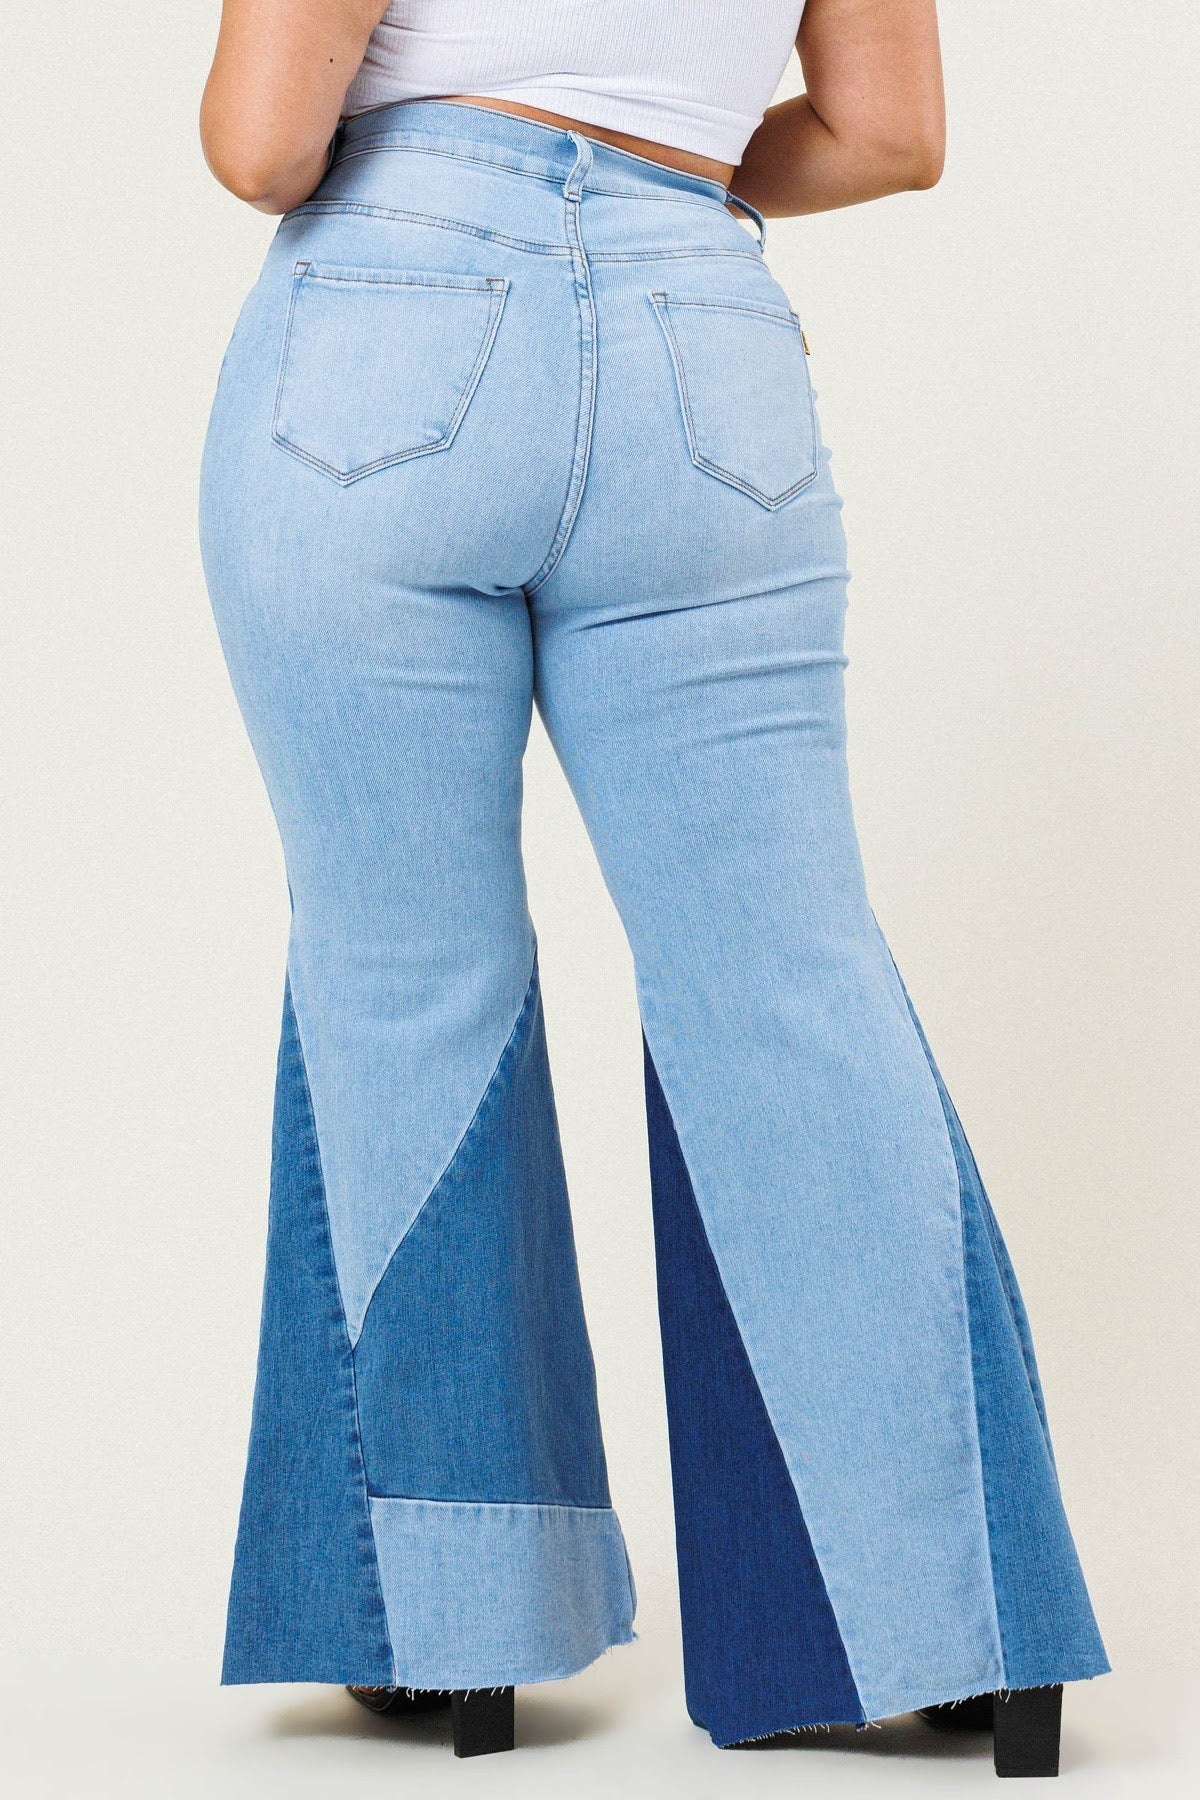 Spin The Color-Block Jeans